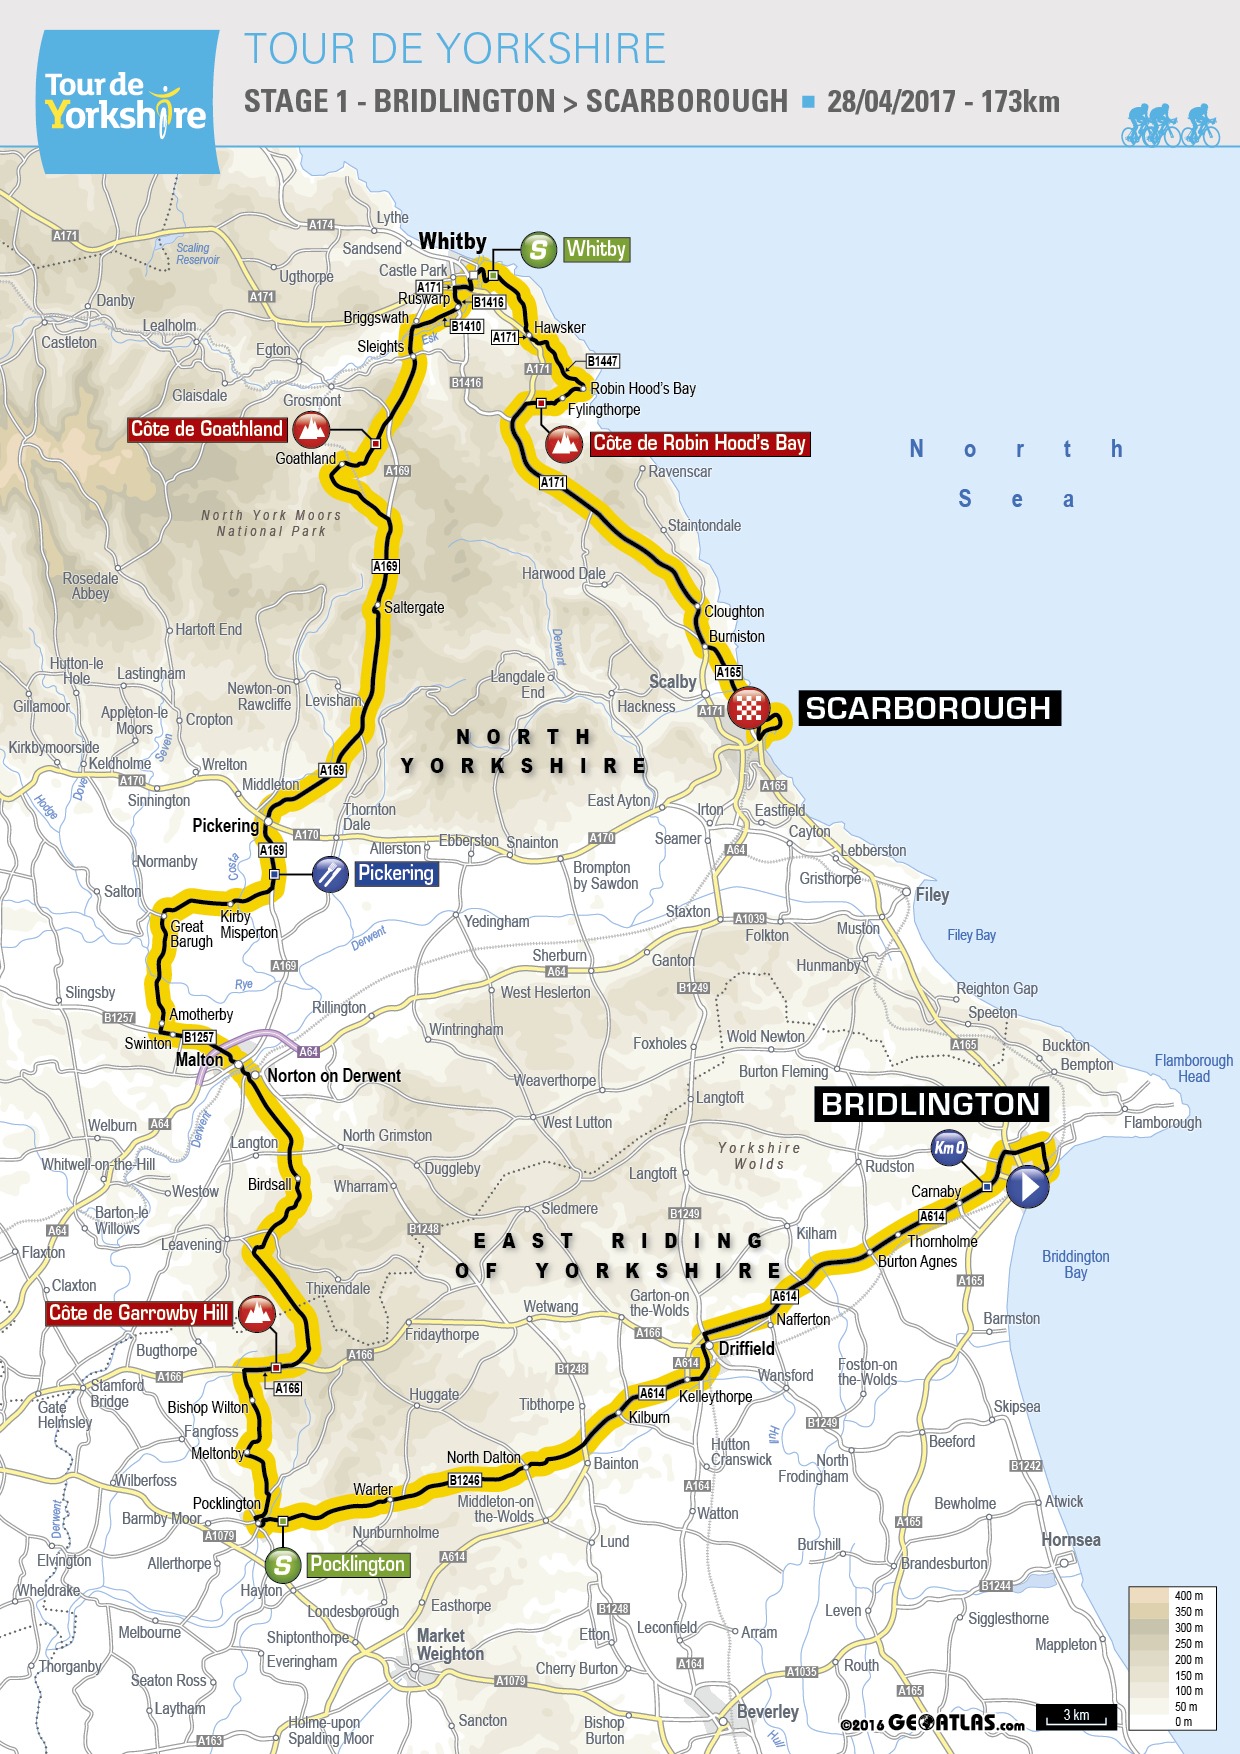 tdy17_map-stage1